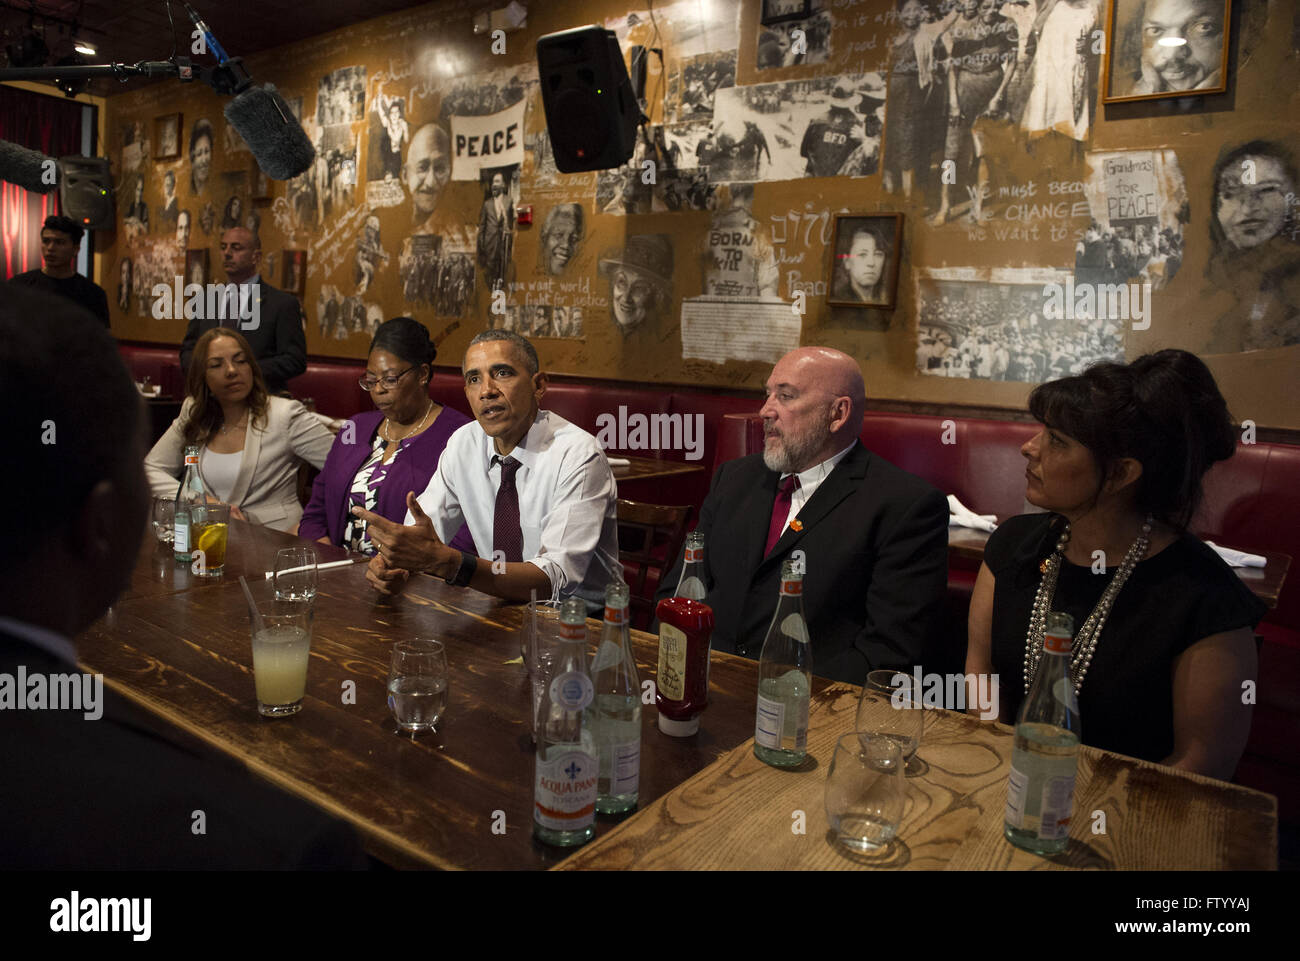 Washington, District of Columbia, USA. 30th Mar, 2016. United States President Barack Obama speaks to the media after having lunch with formerly incarcerated individuals who have received commutations, at Bus Boys and Poets restaurant in Washington, DC on March 30, 2016. Obama commuted 61 additional sentences today.Credit: Kevin Dietsch/Pool via CNP © Kevin Dietsch/CNP/ZUMA Wire/Alamy Live News Stock Photo